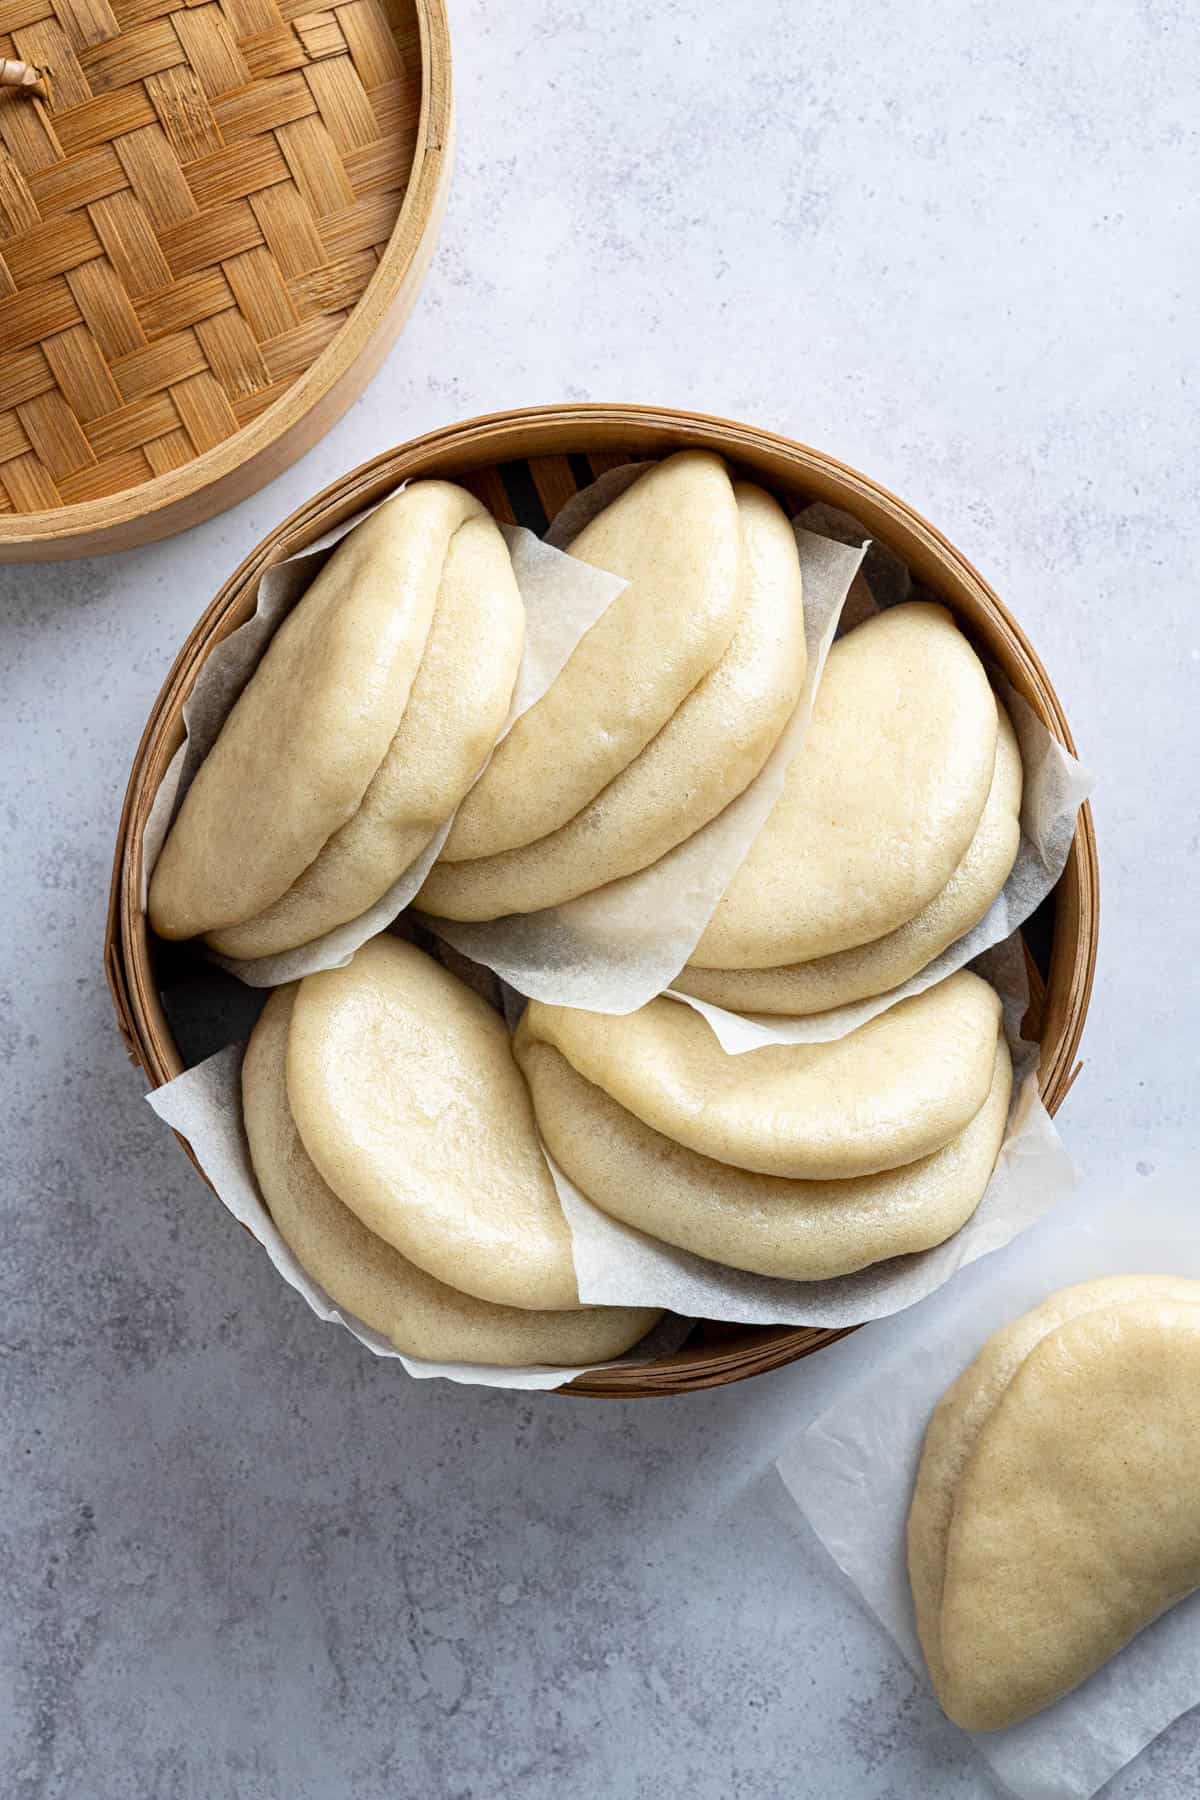 Bao buns on pieces of baking paper in a bamboo steamer.